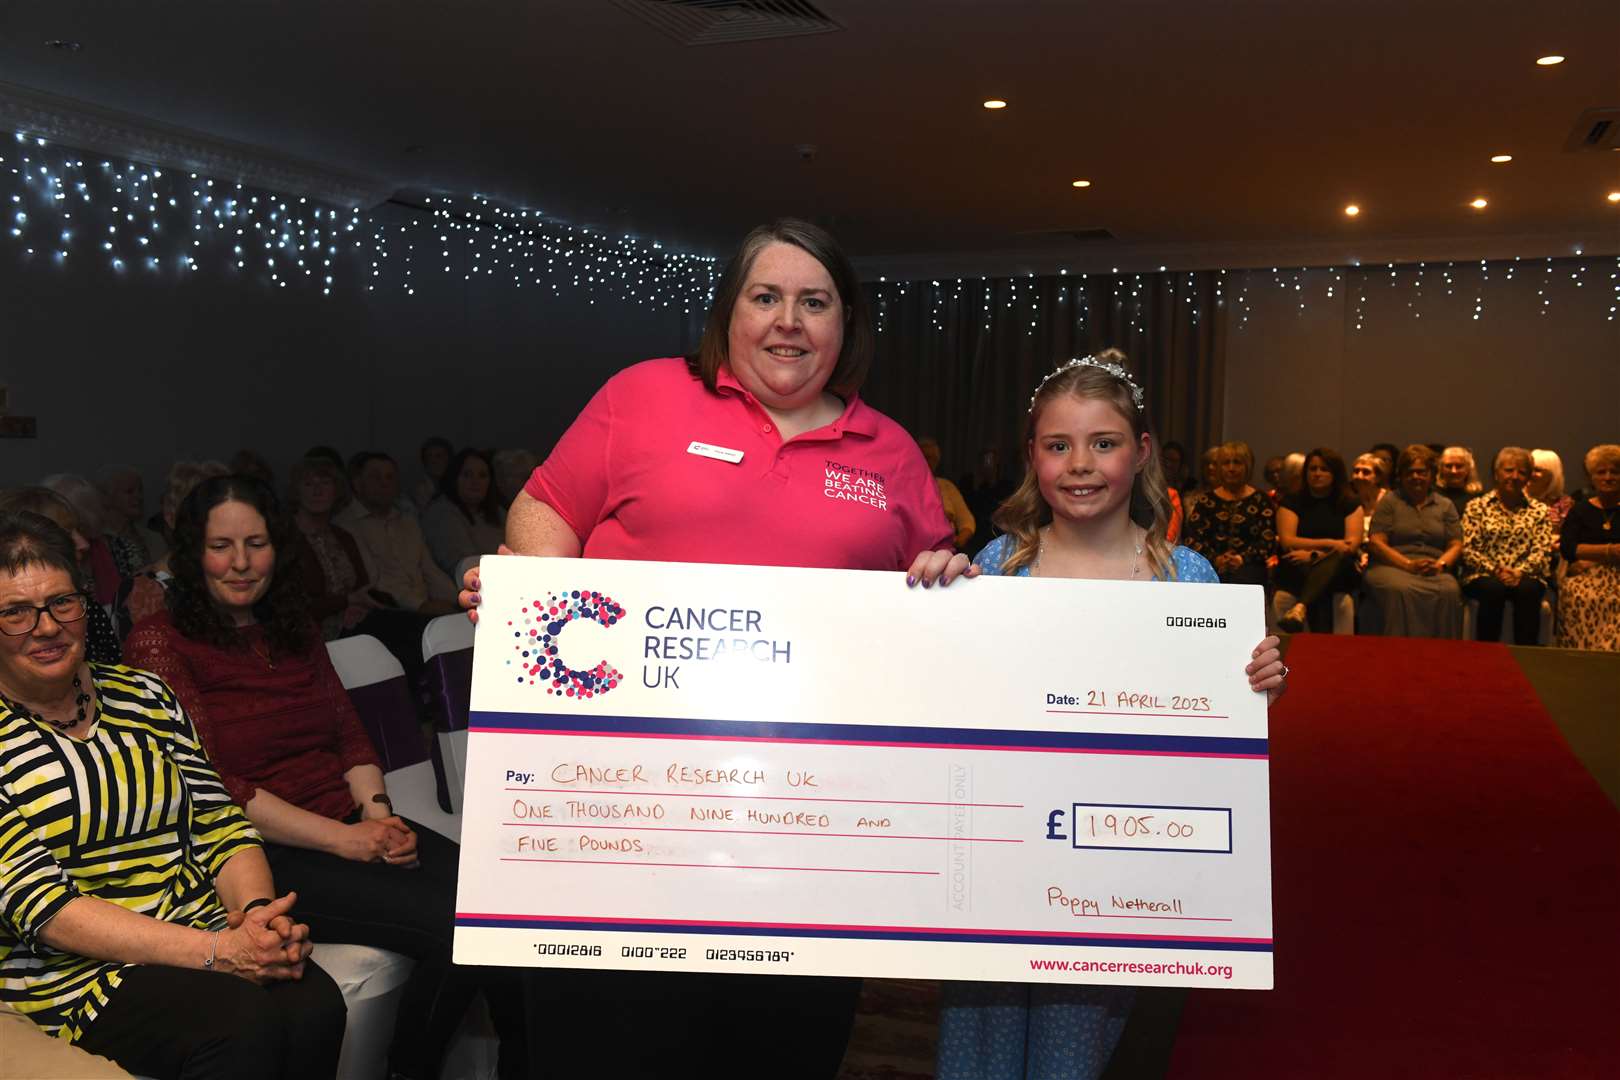 Fiona Gibson, relationship manager at Cancer Research UK and Poppy Weatherall, who ran 10k and raised £1905 for charity. Picture: Alexander Williamson.